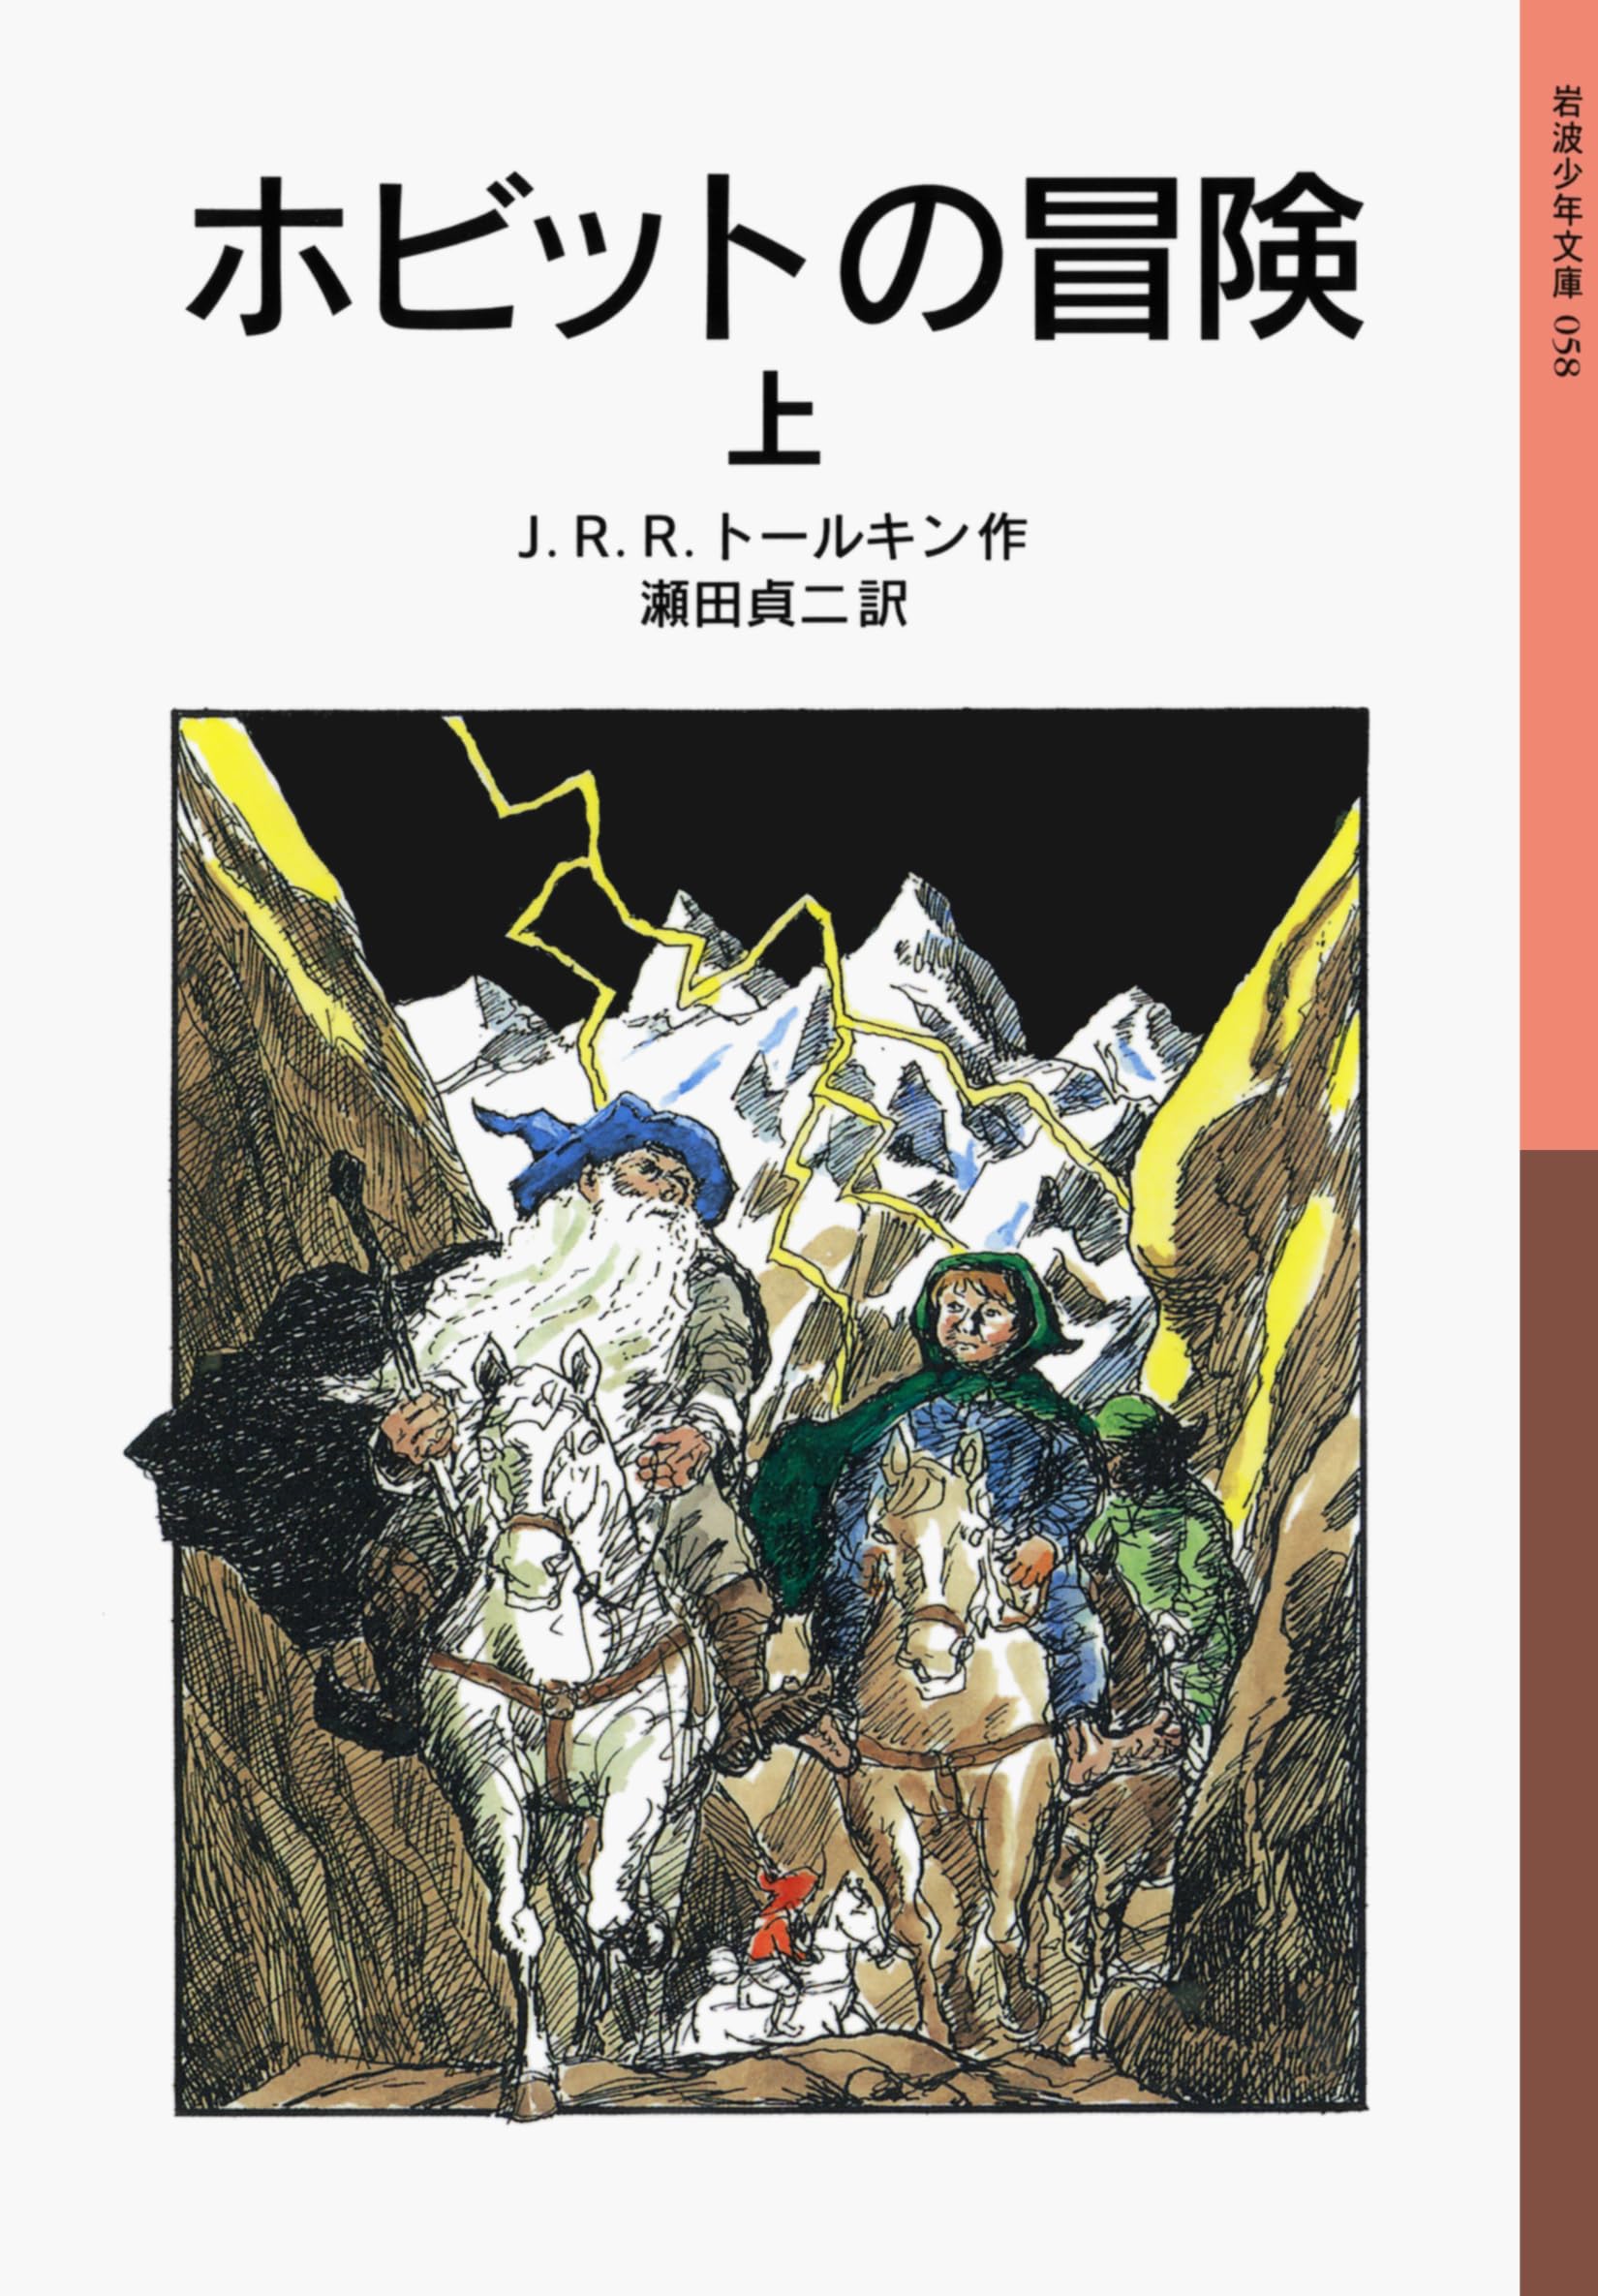 The Hobbit Vol. 1 of 2 (Japanese Edition)